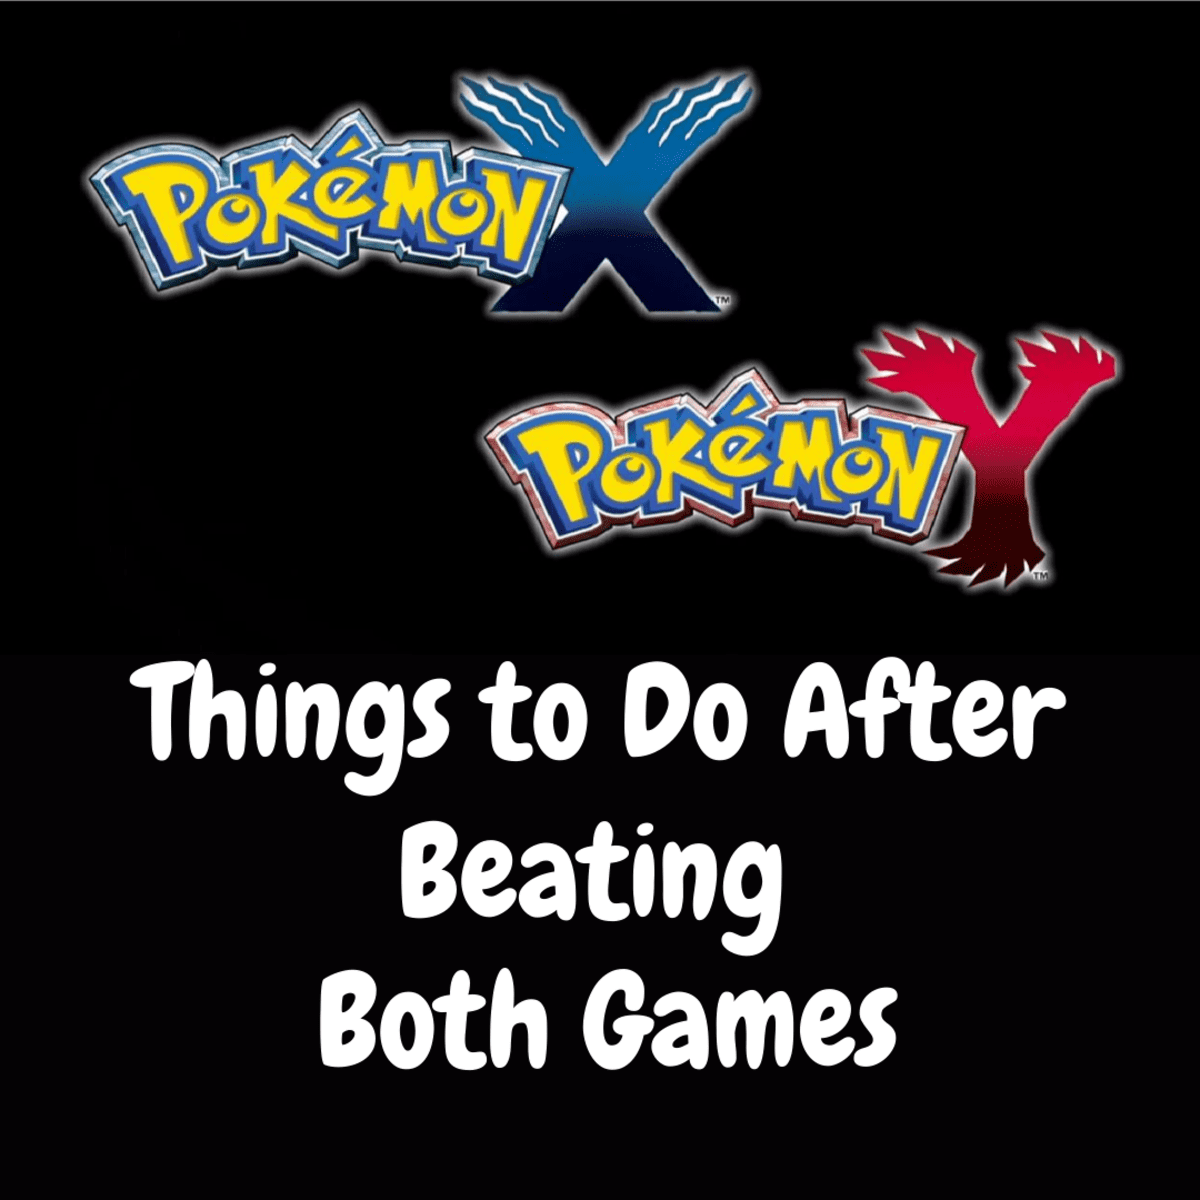 Pokémon X & Y - All You Need to Know to Get Started - Guide